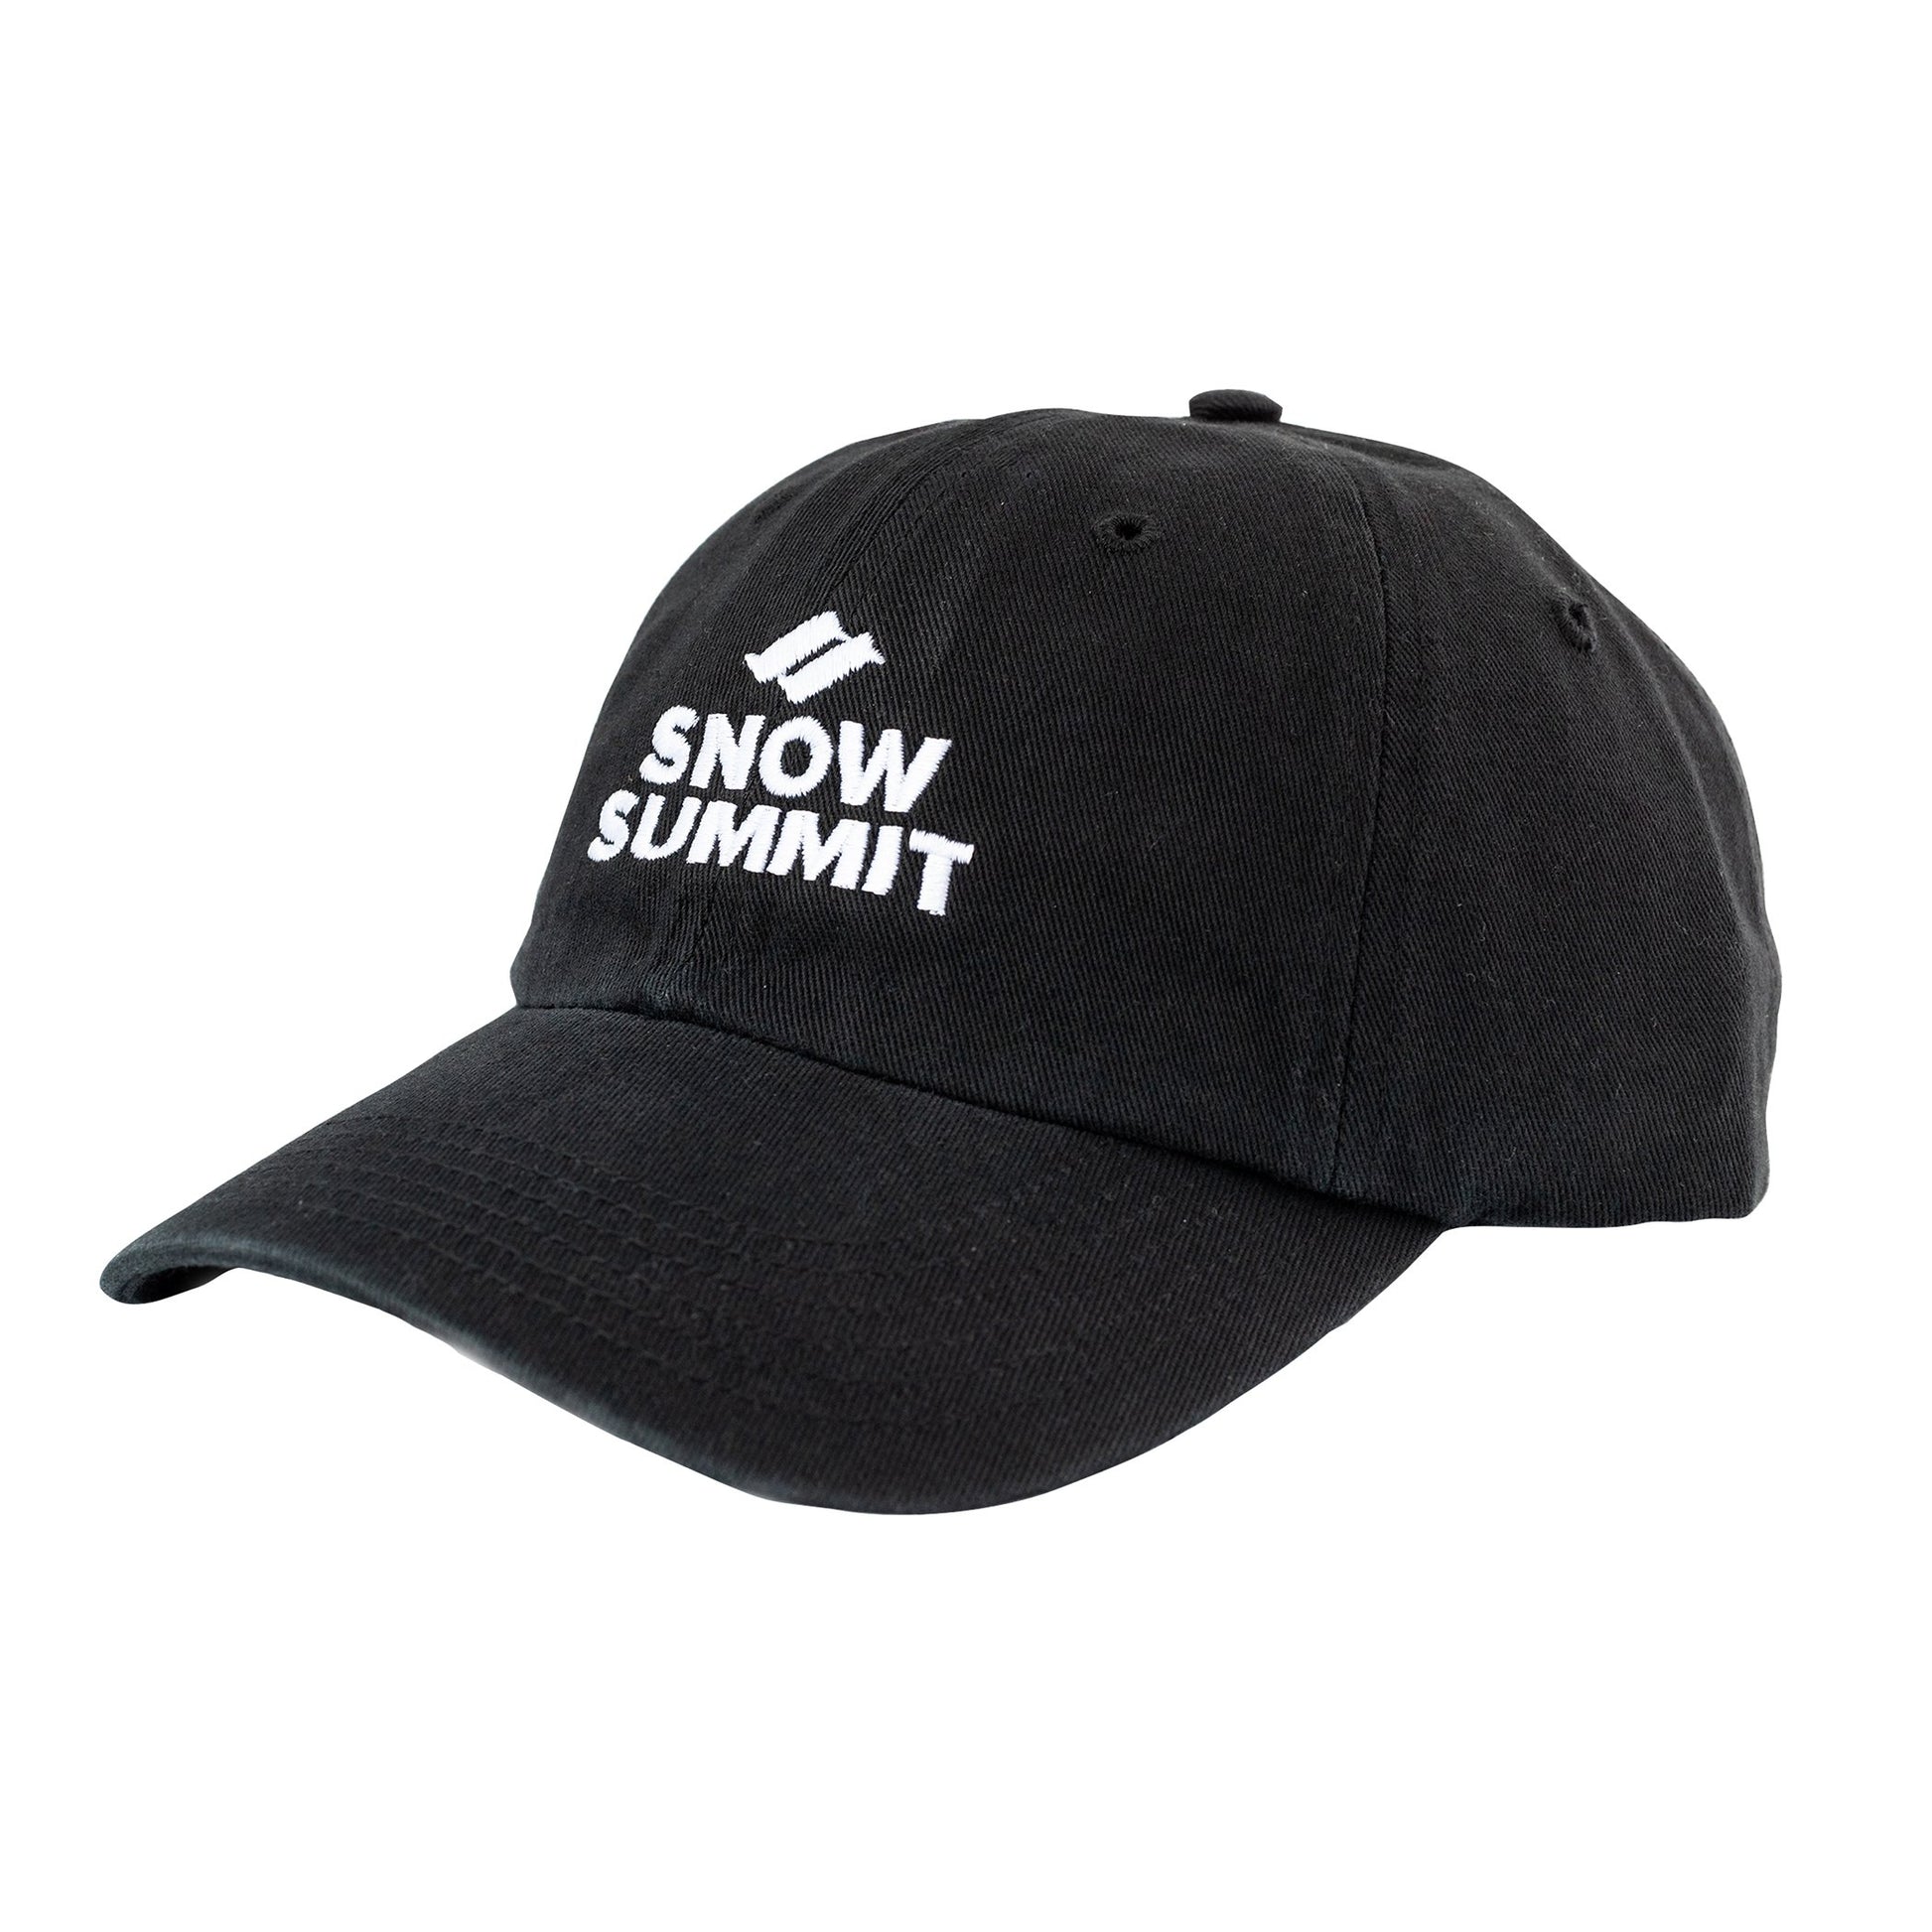 Black Cap with Embroidered Snow Summit Logo